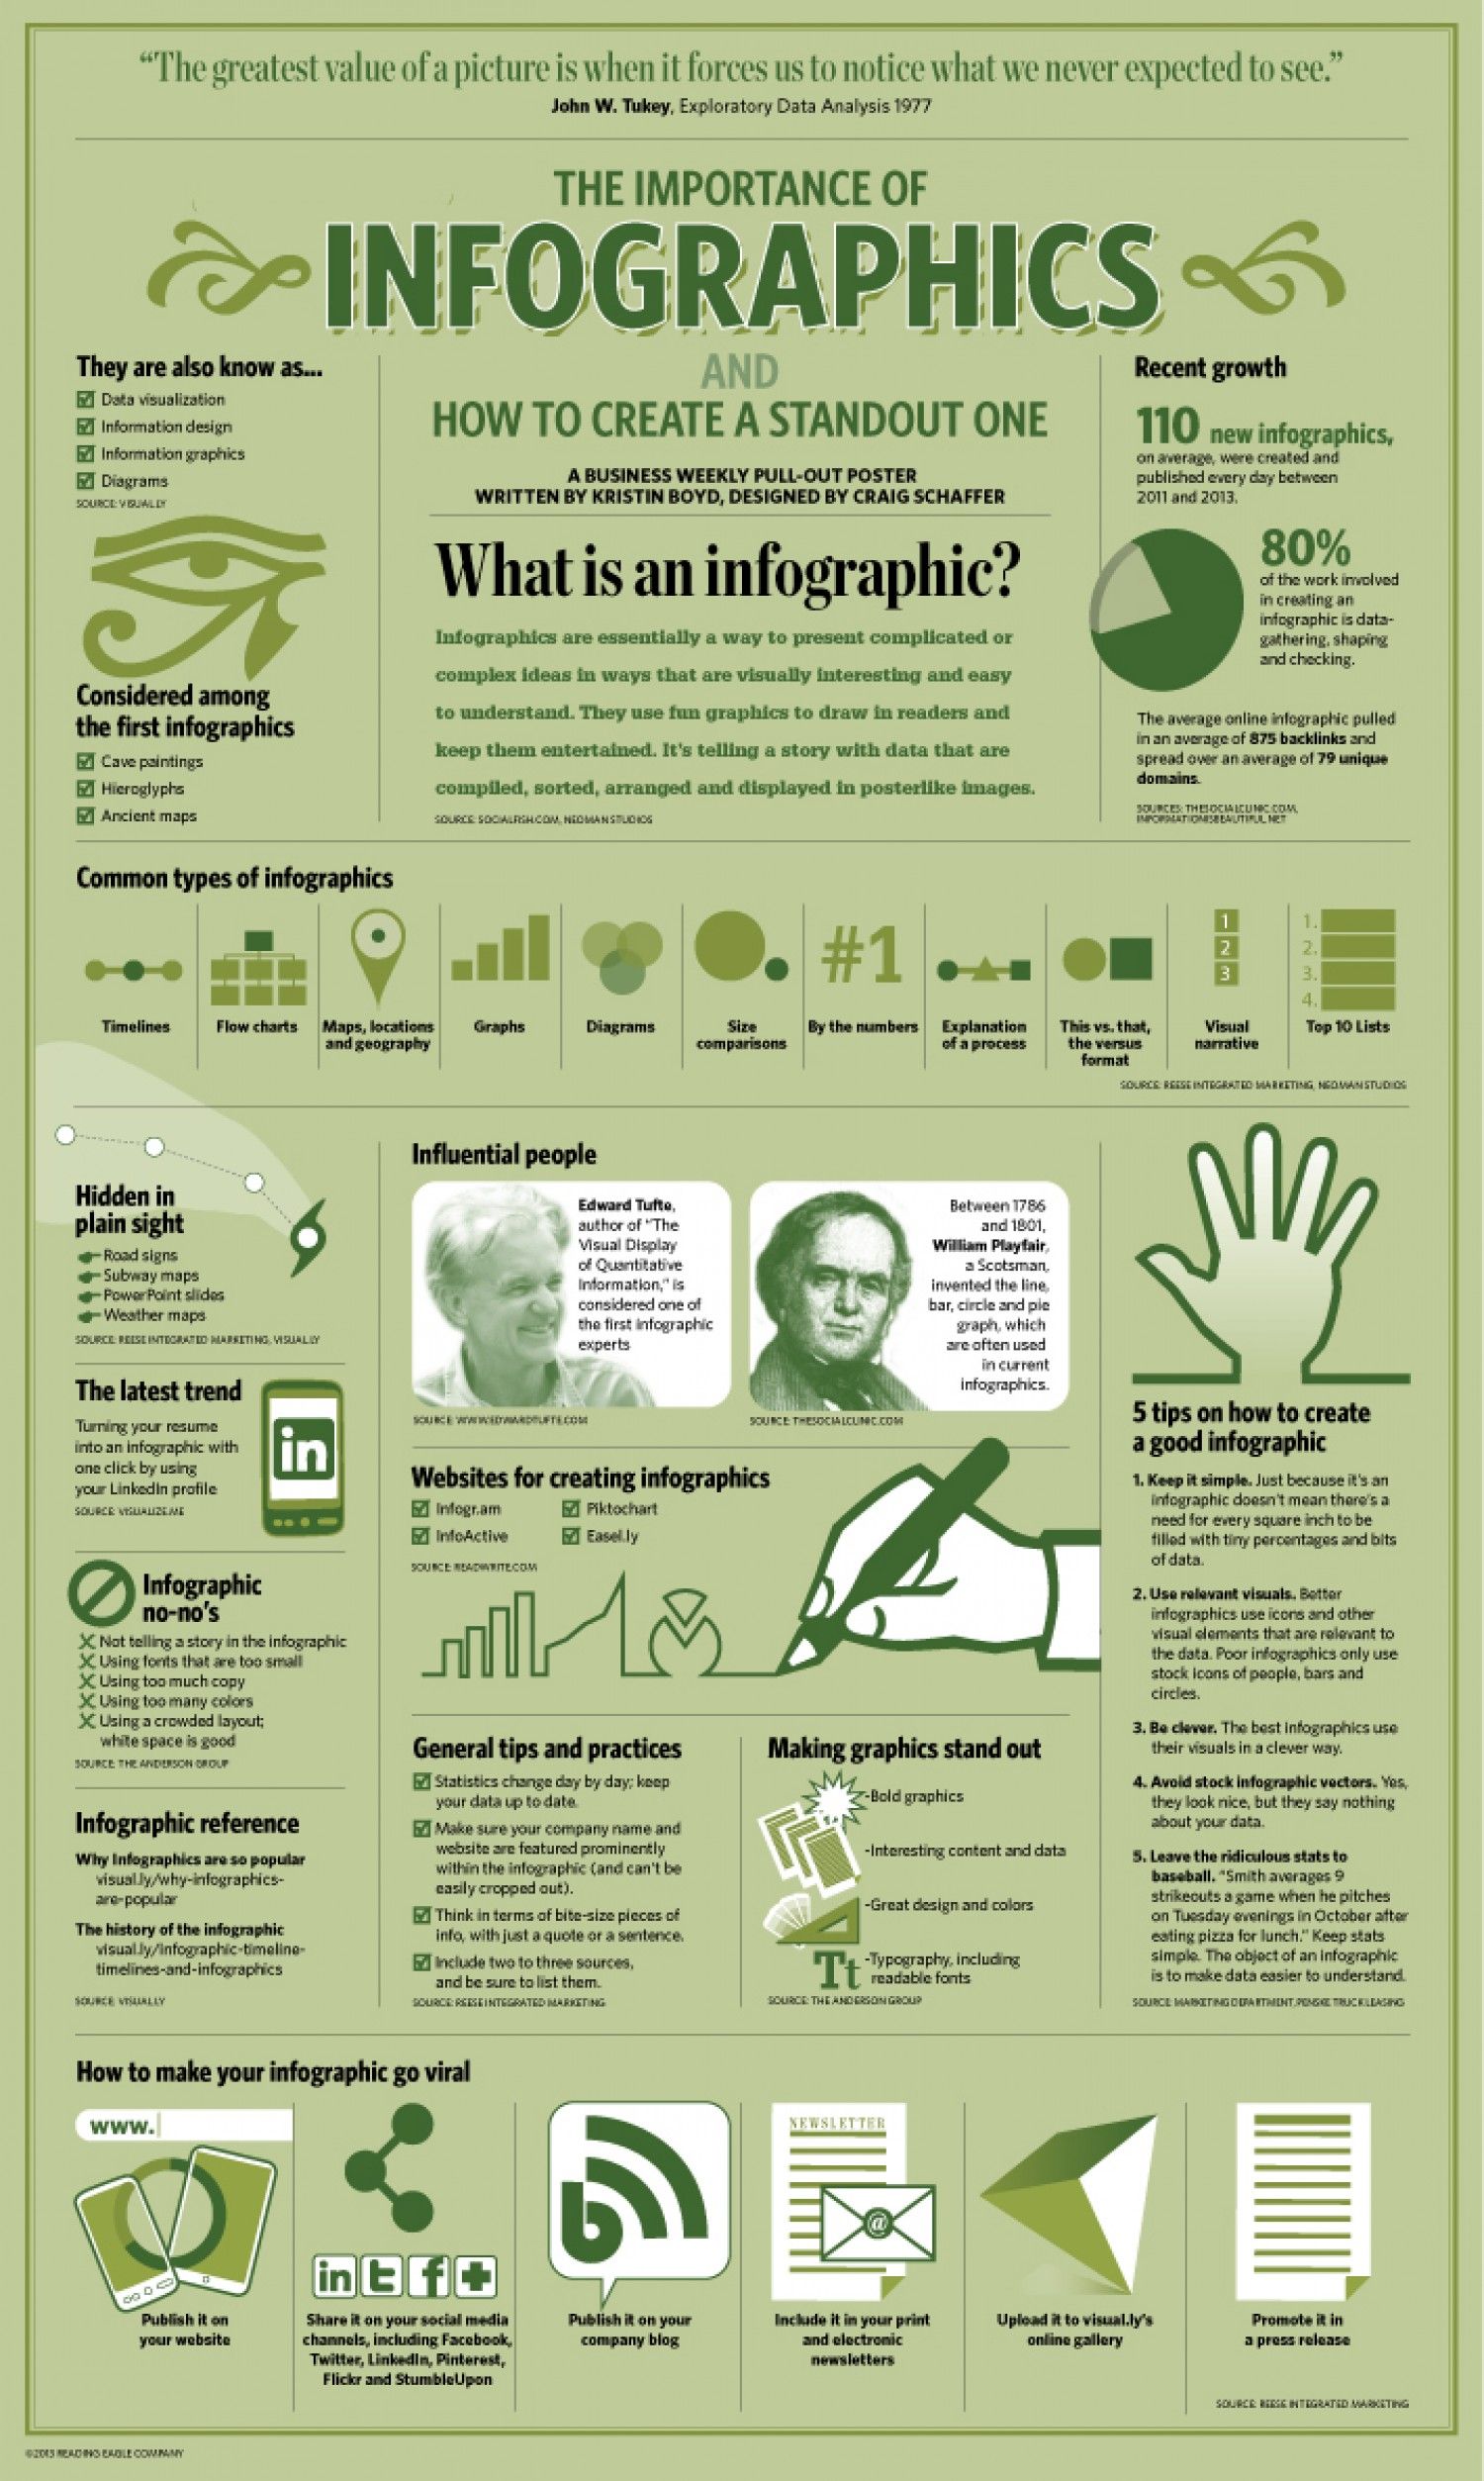 The Importance of infographics